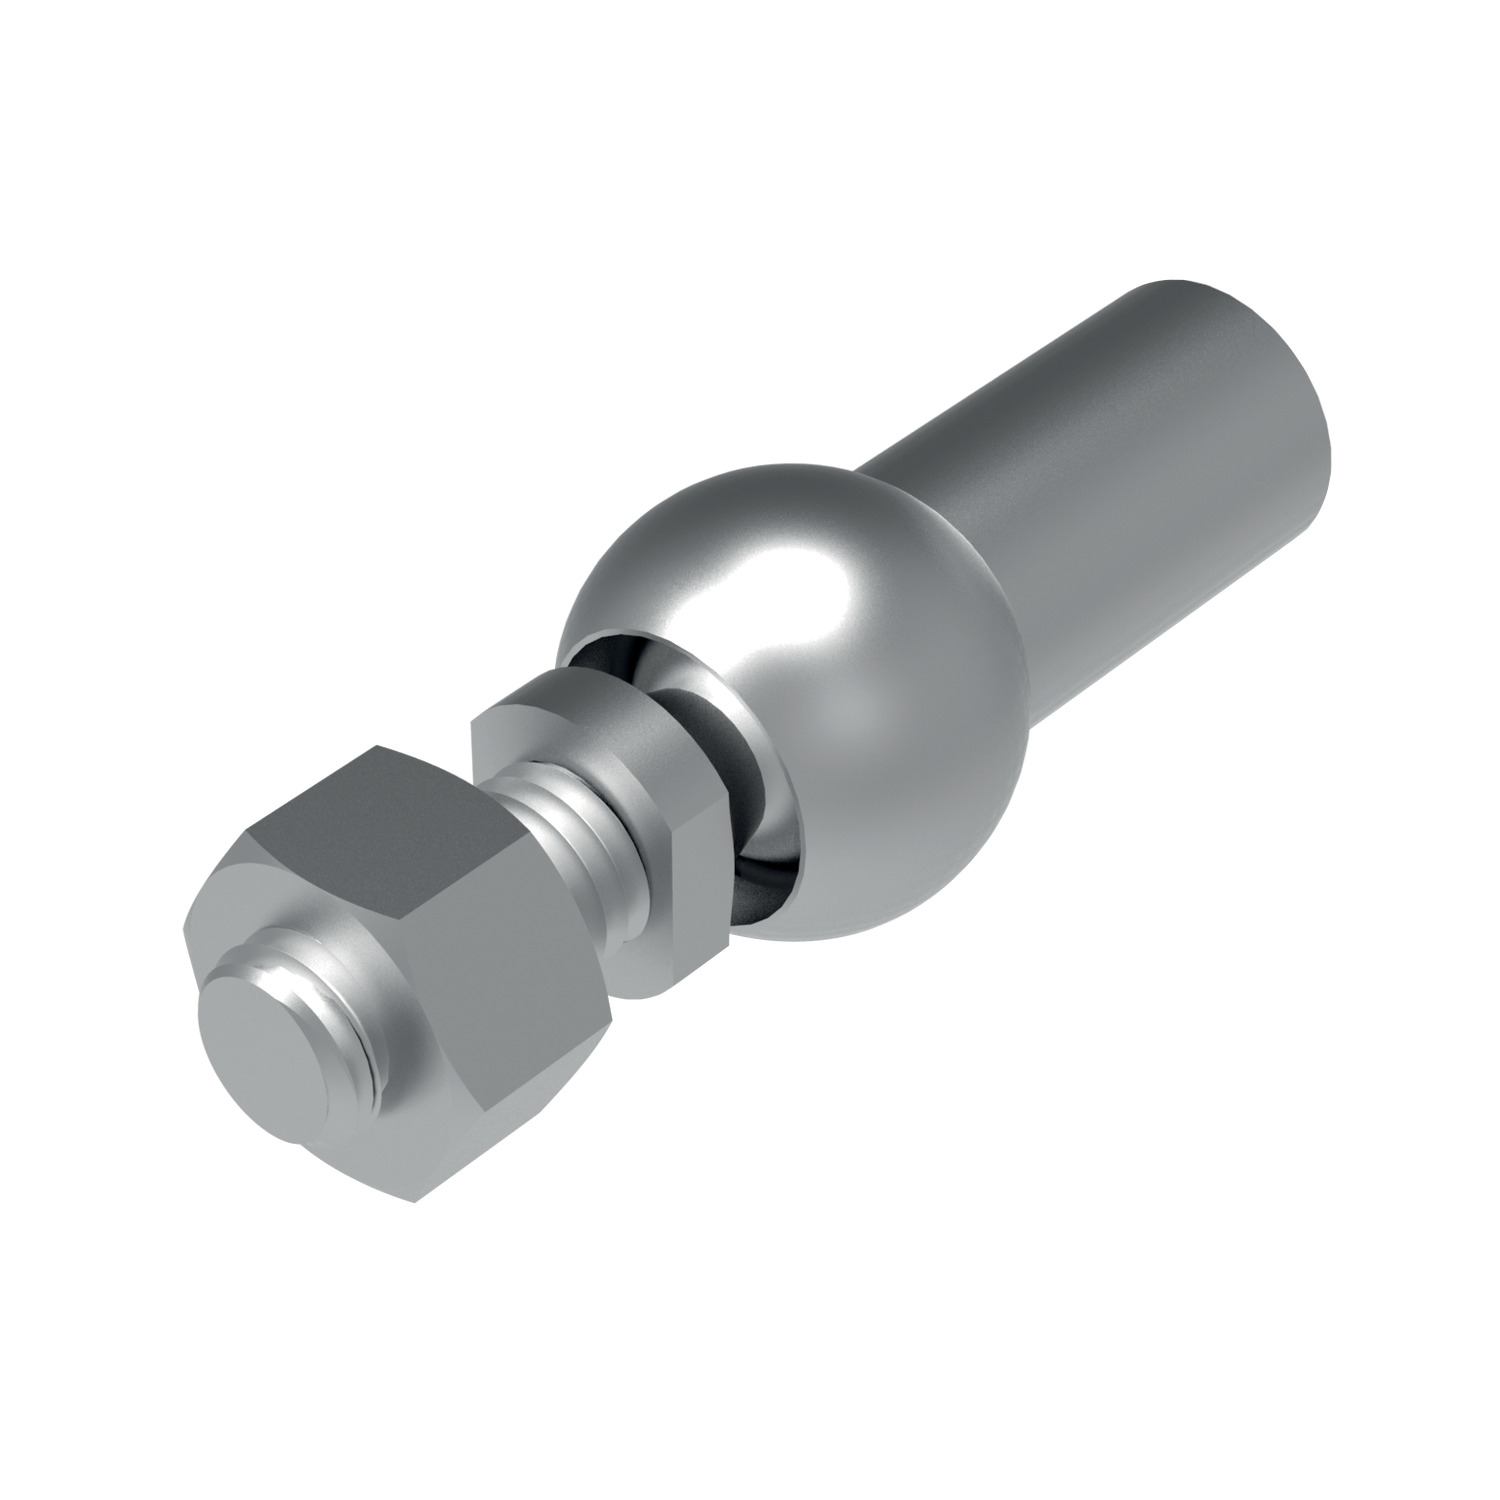 Axial Ball and Socket Joints In-line axial ZP steel ball and socket joint. Also available in left hand thread (R3501)